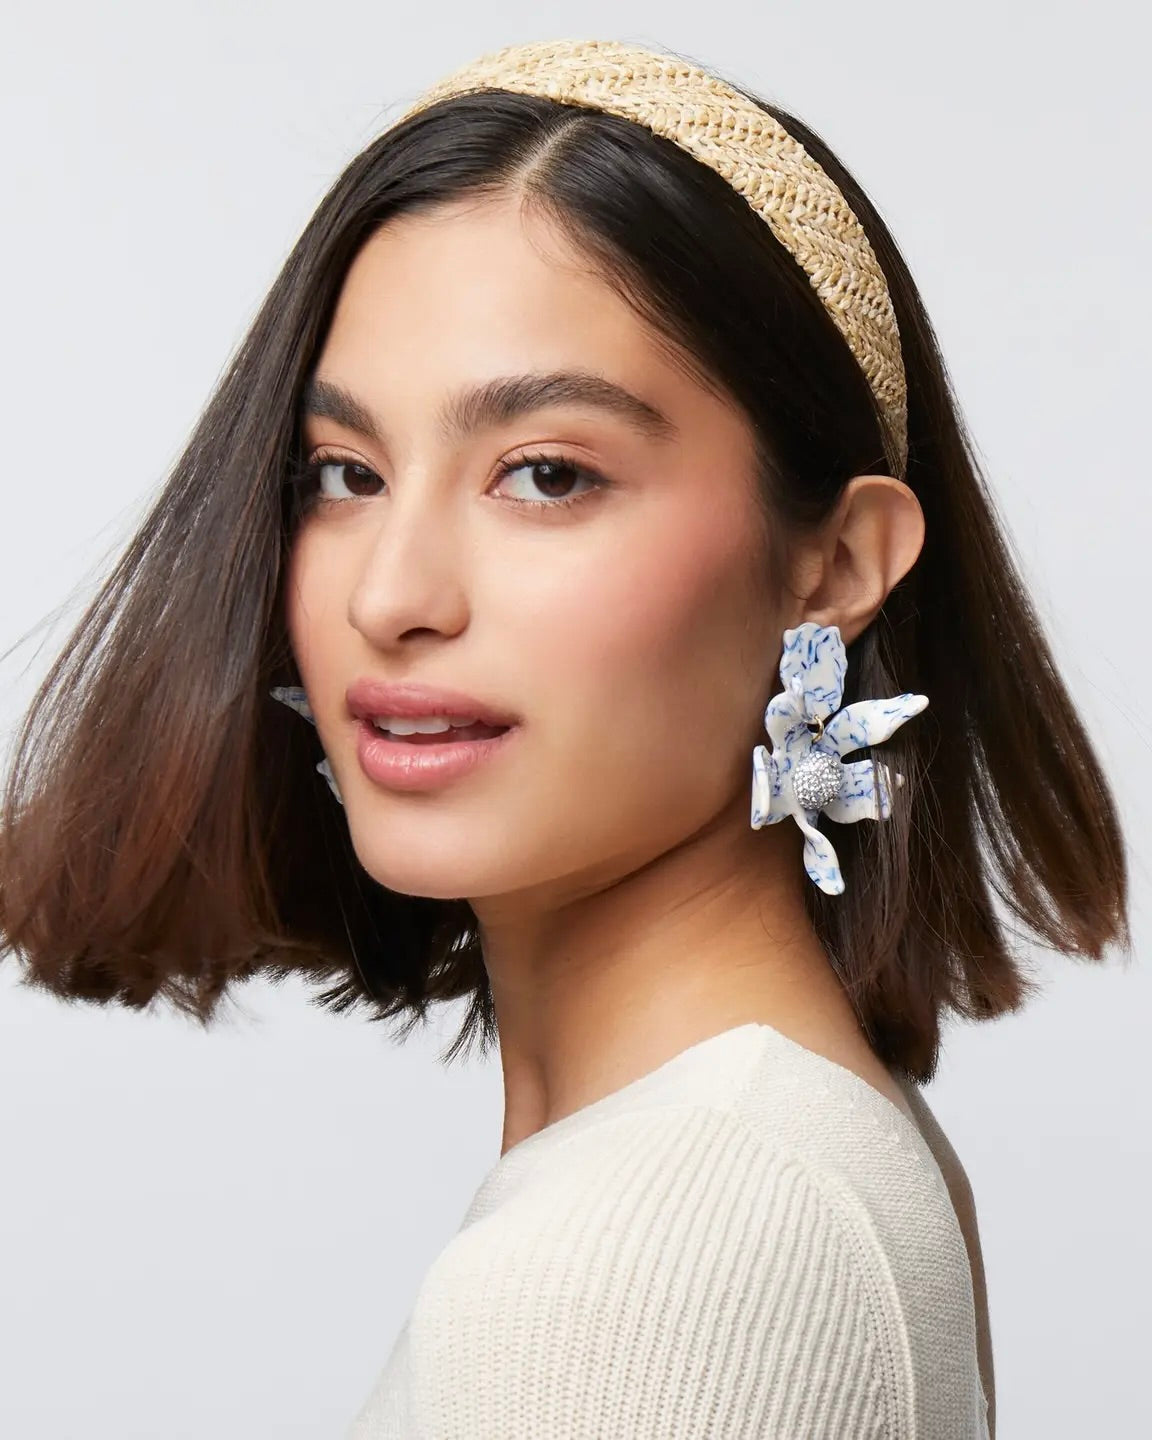 Model wearing Lele Sadoughi Natural Raffia Bessette Headband wearing Big earrings and a white top on a white background